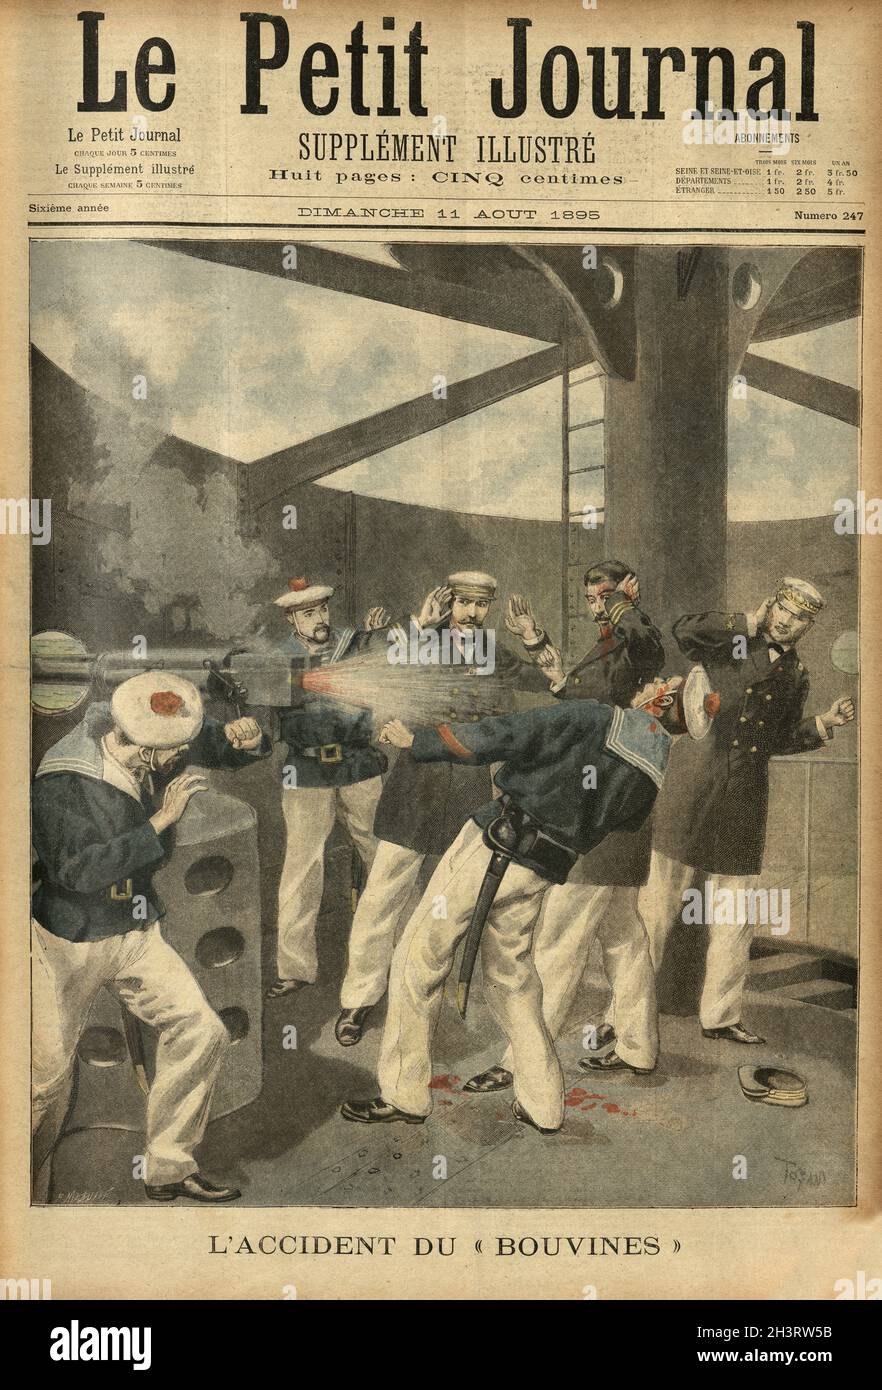 Front page of Le Petit Journal, 11 Aout 1895. l'accident du bouvines, Accident on french warship, Bouvines, Firearm malfunction, Cannon backfire Stock Photo